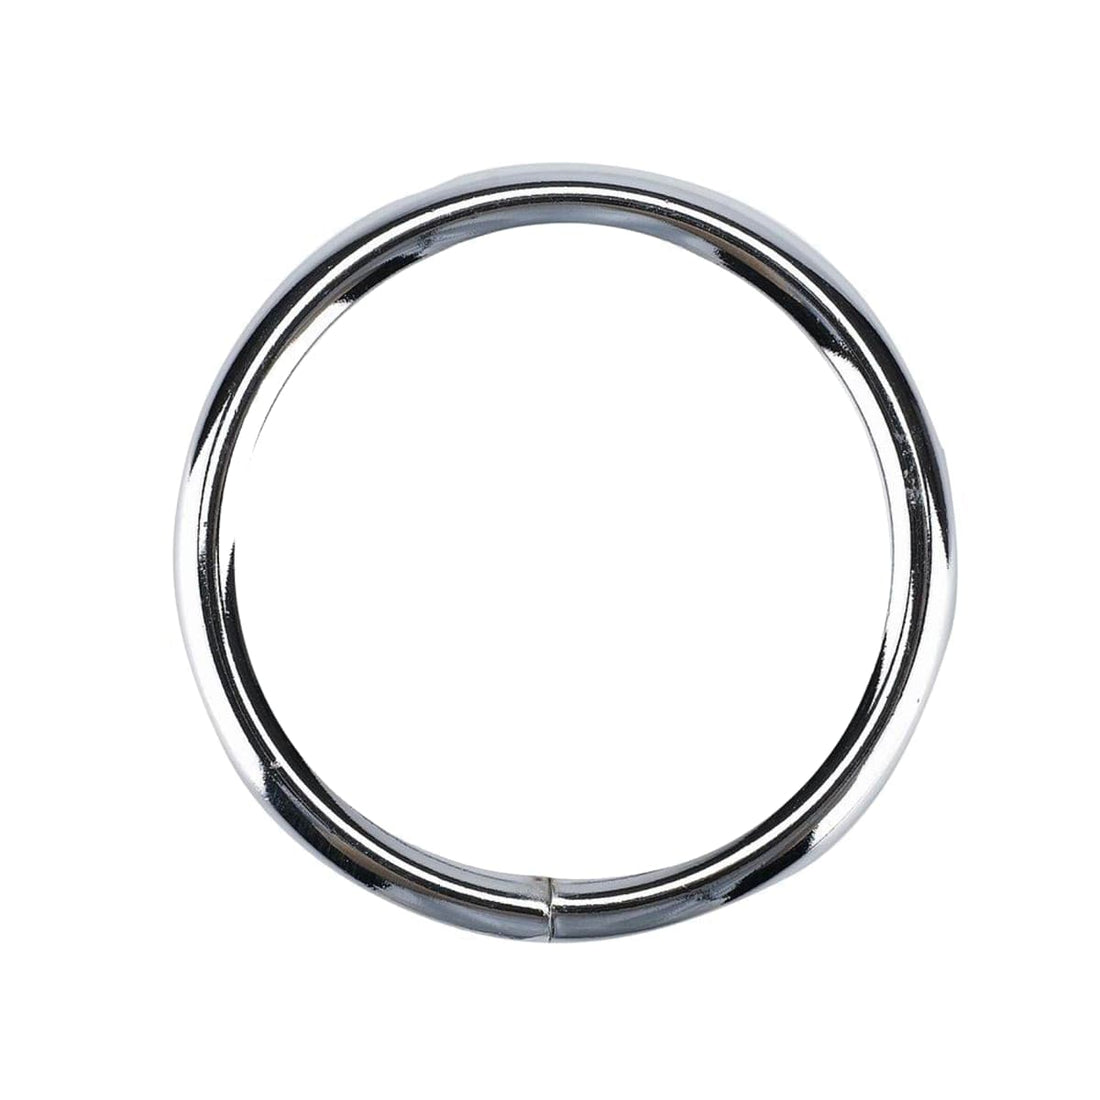 METAL RINGS D20 CHROME POLISHED 10 PIECES - best price from Maltashopper.com BR410620911